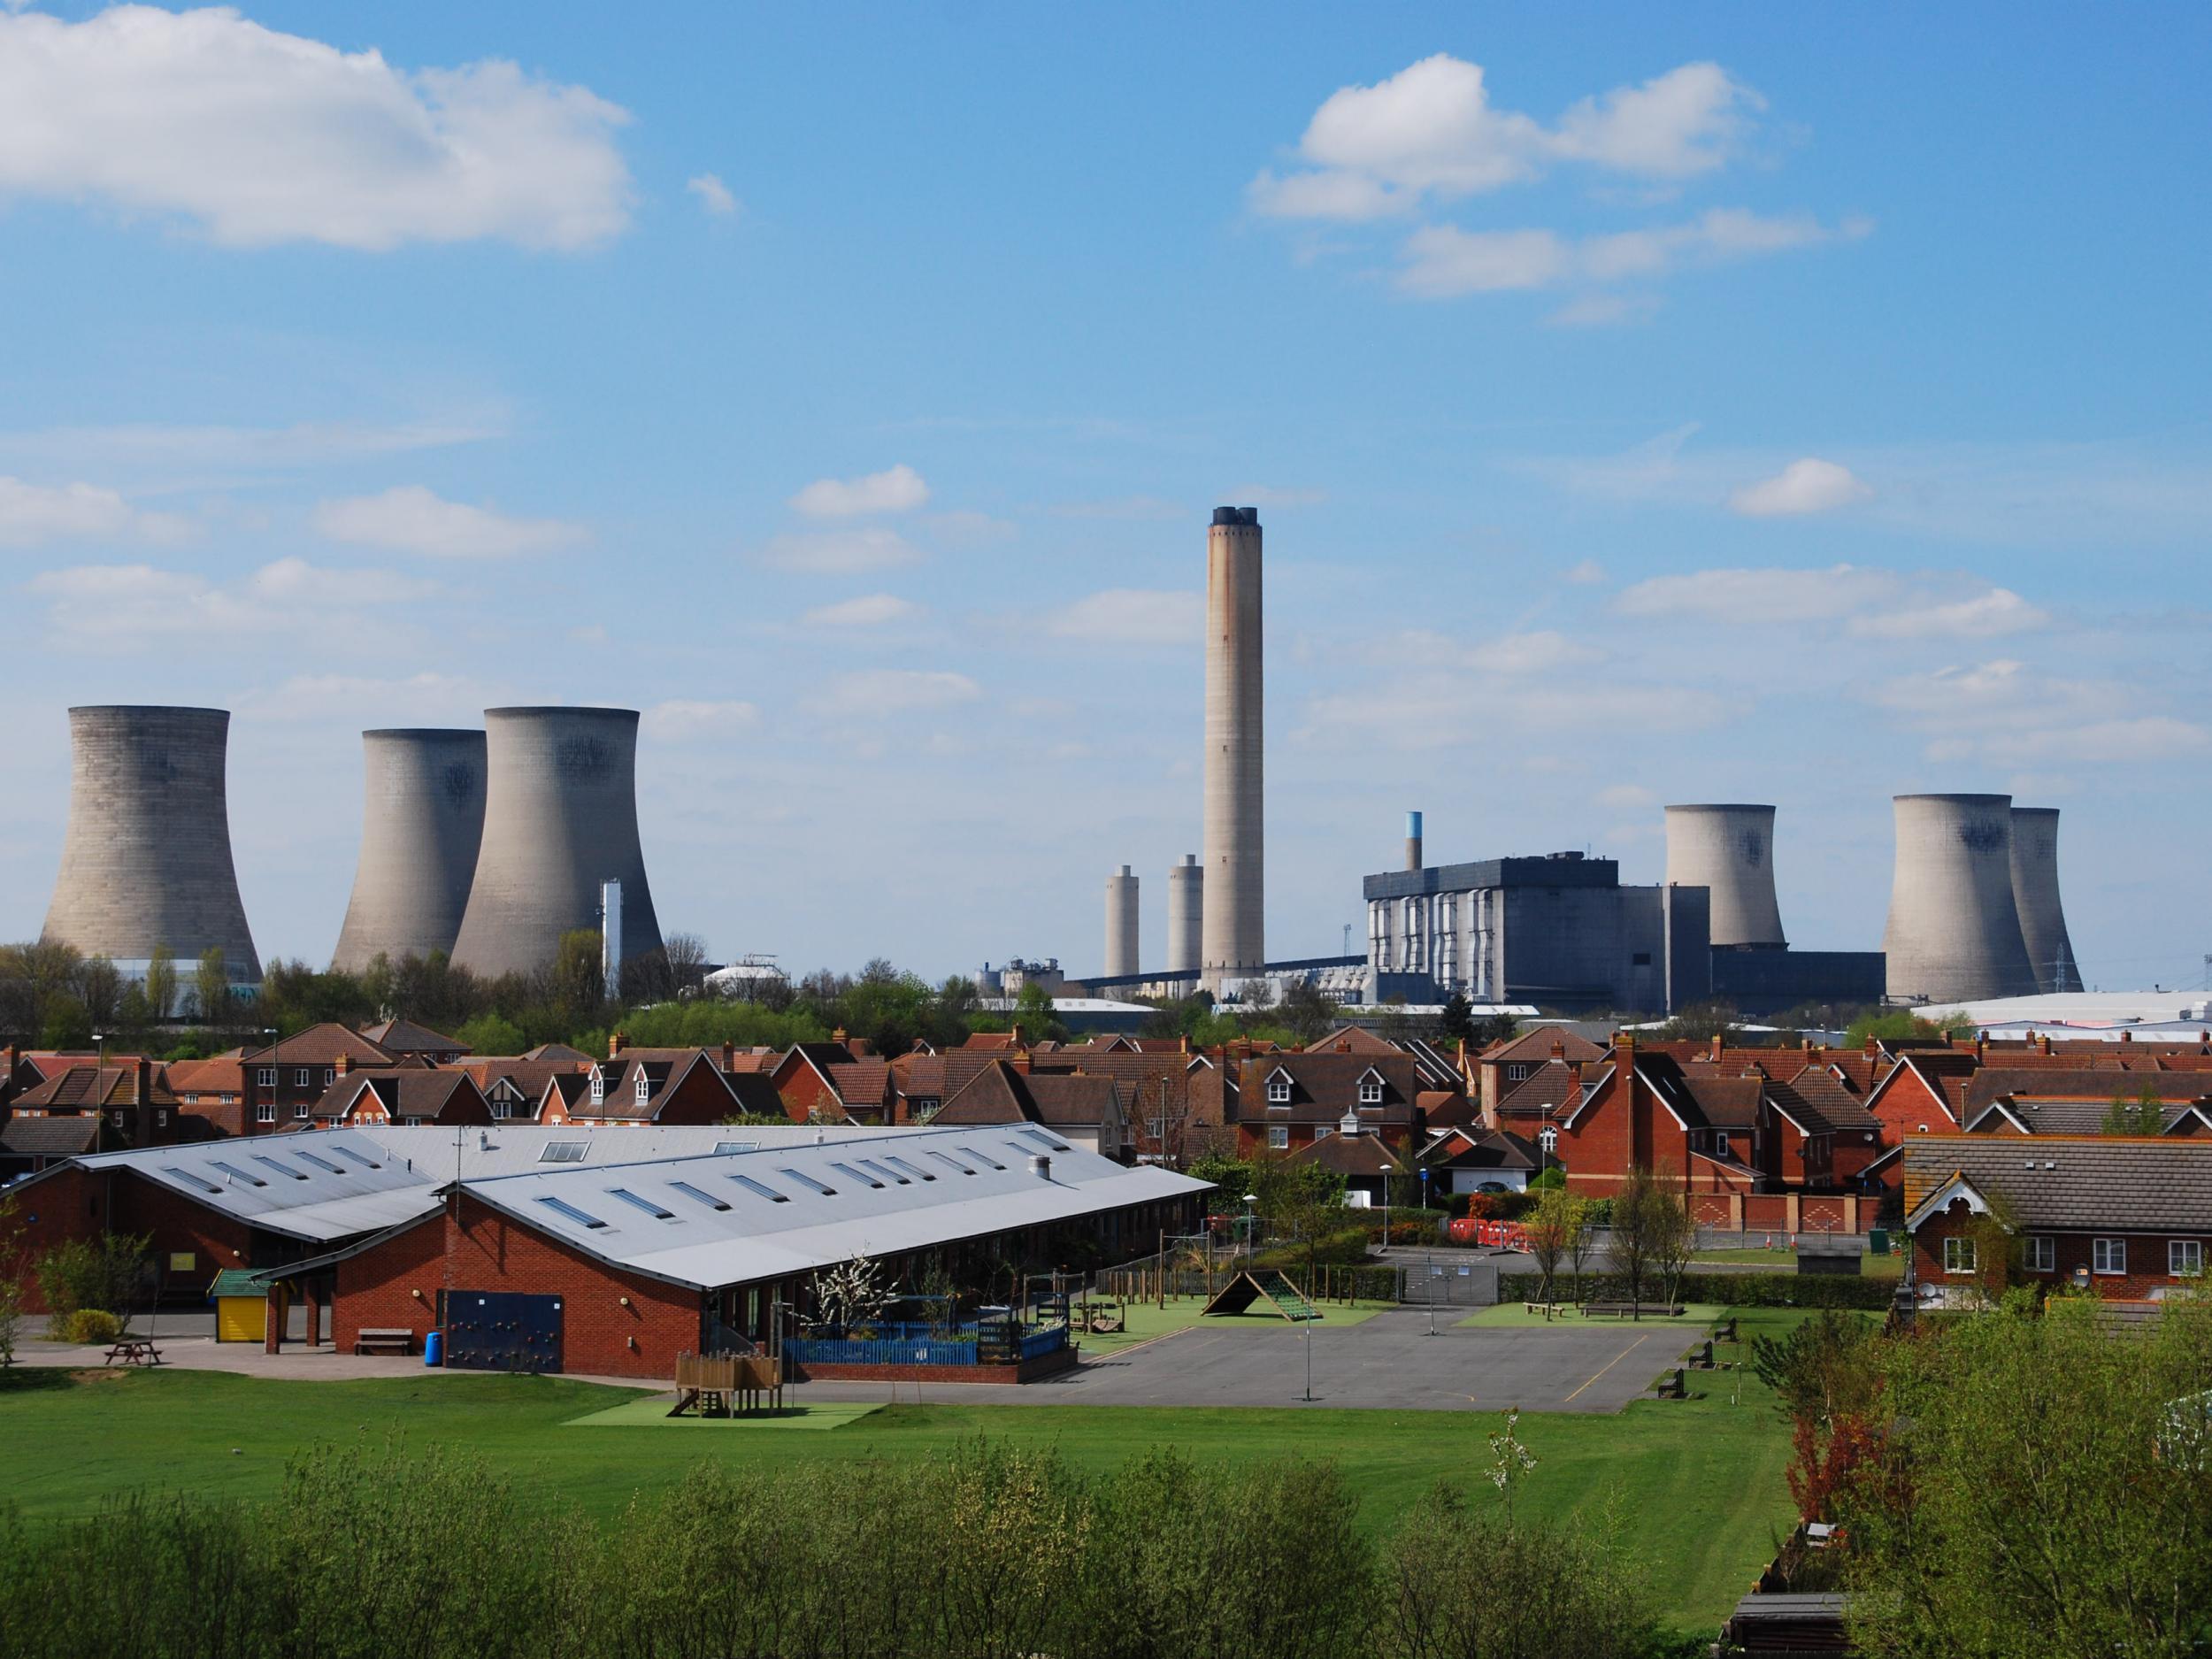 The government named Didcot a Garden town in 2015, the first existing town to gain this status